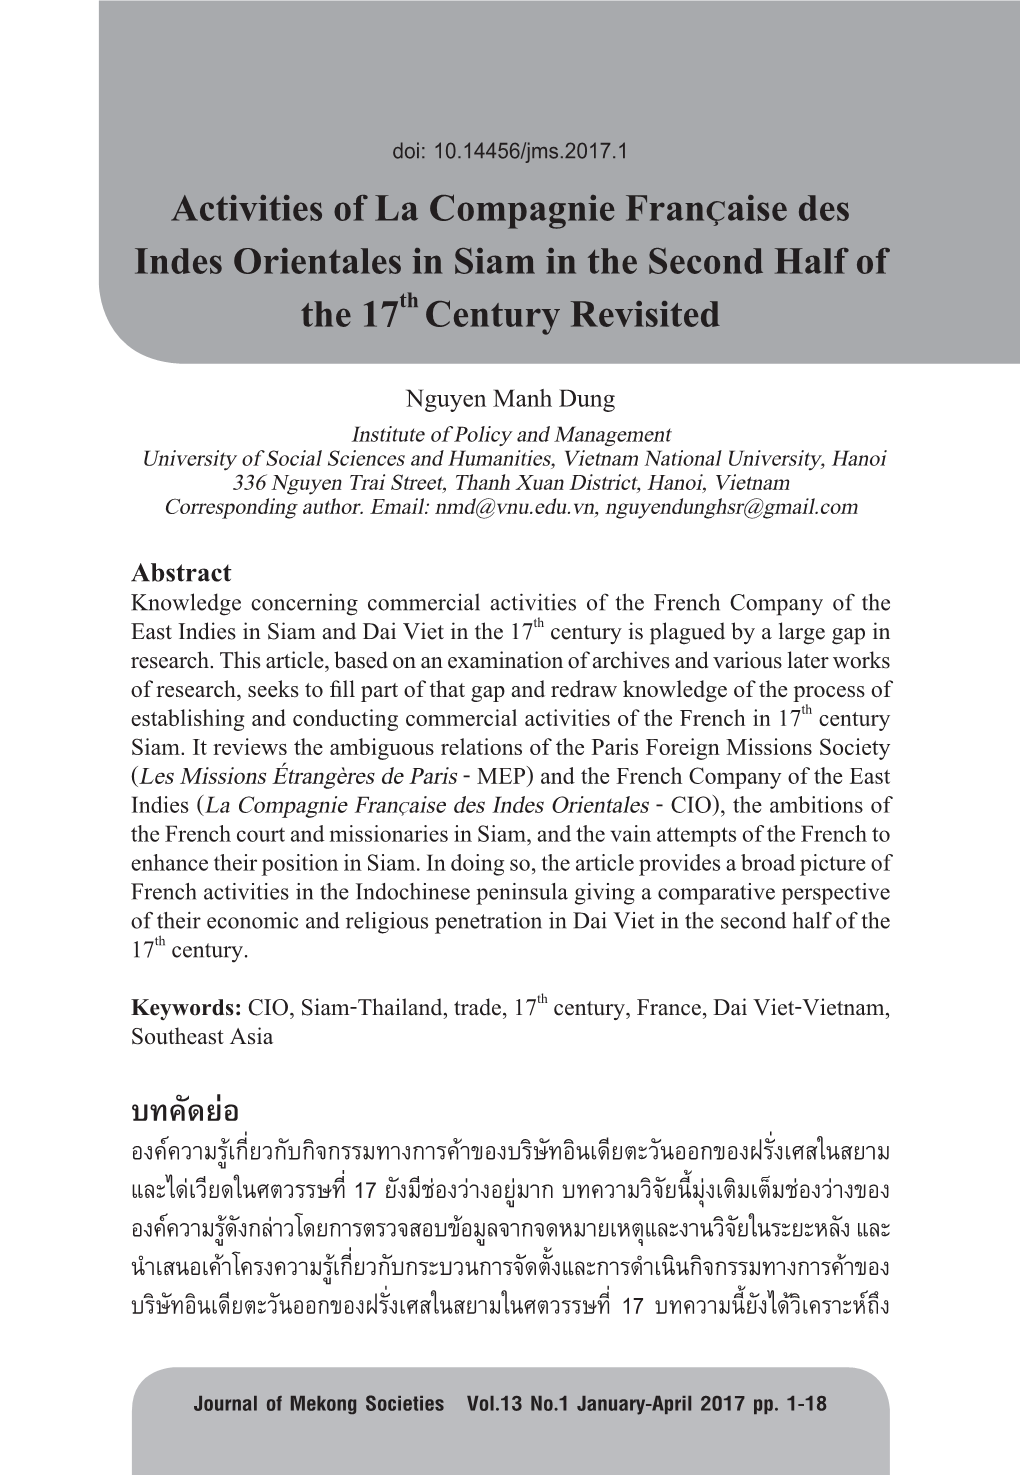 Activities of La Compagnie Française Des Indes Orientales in Siam in The